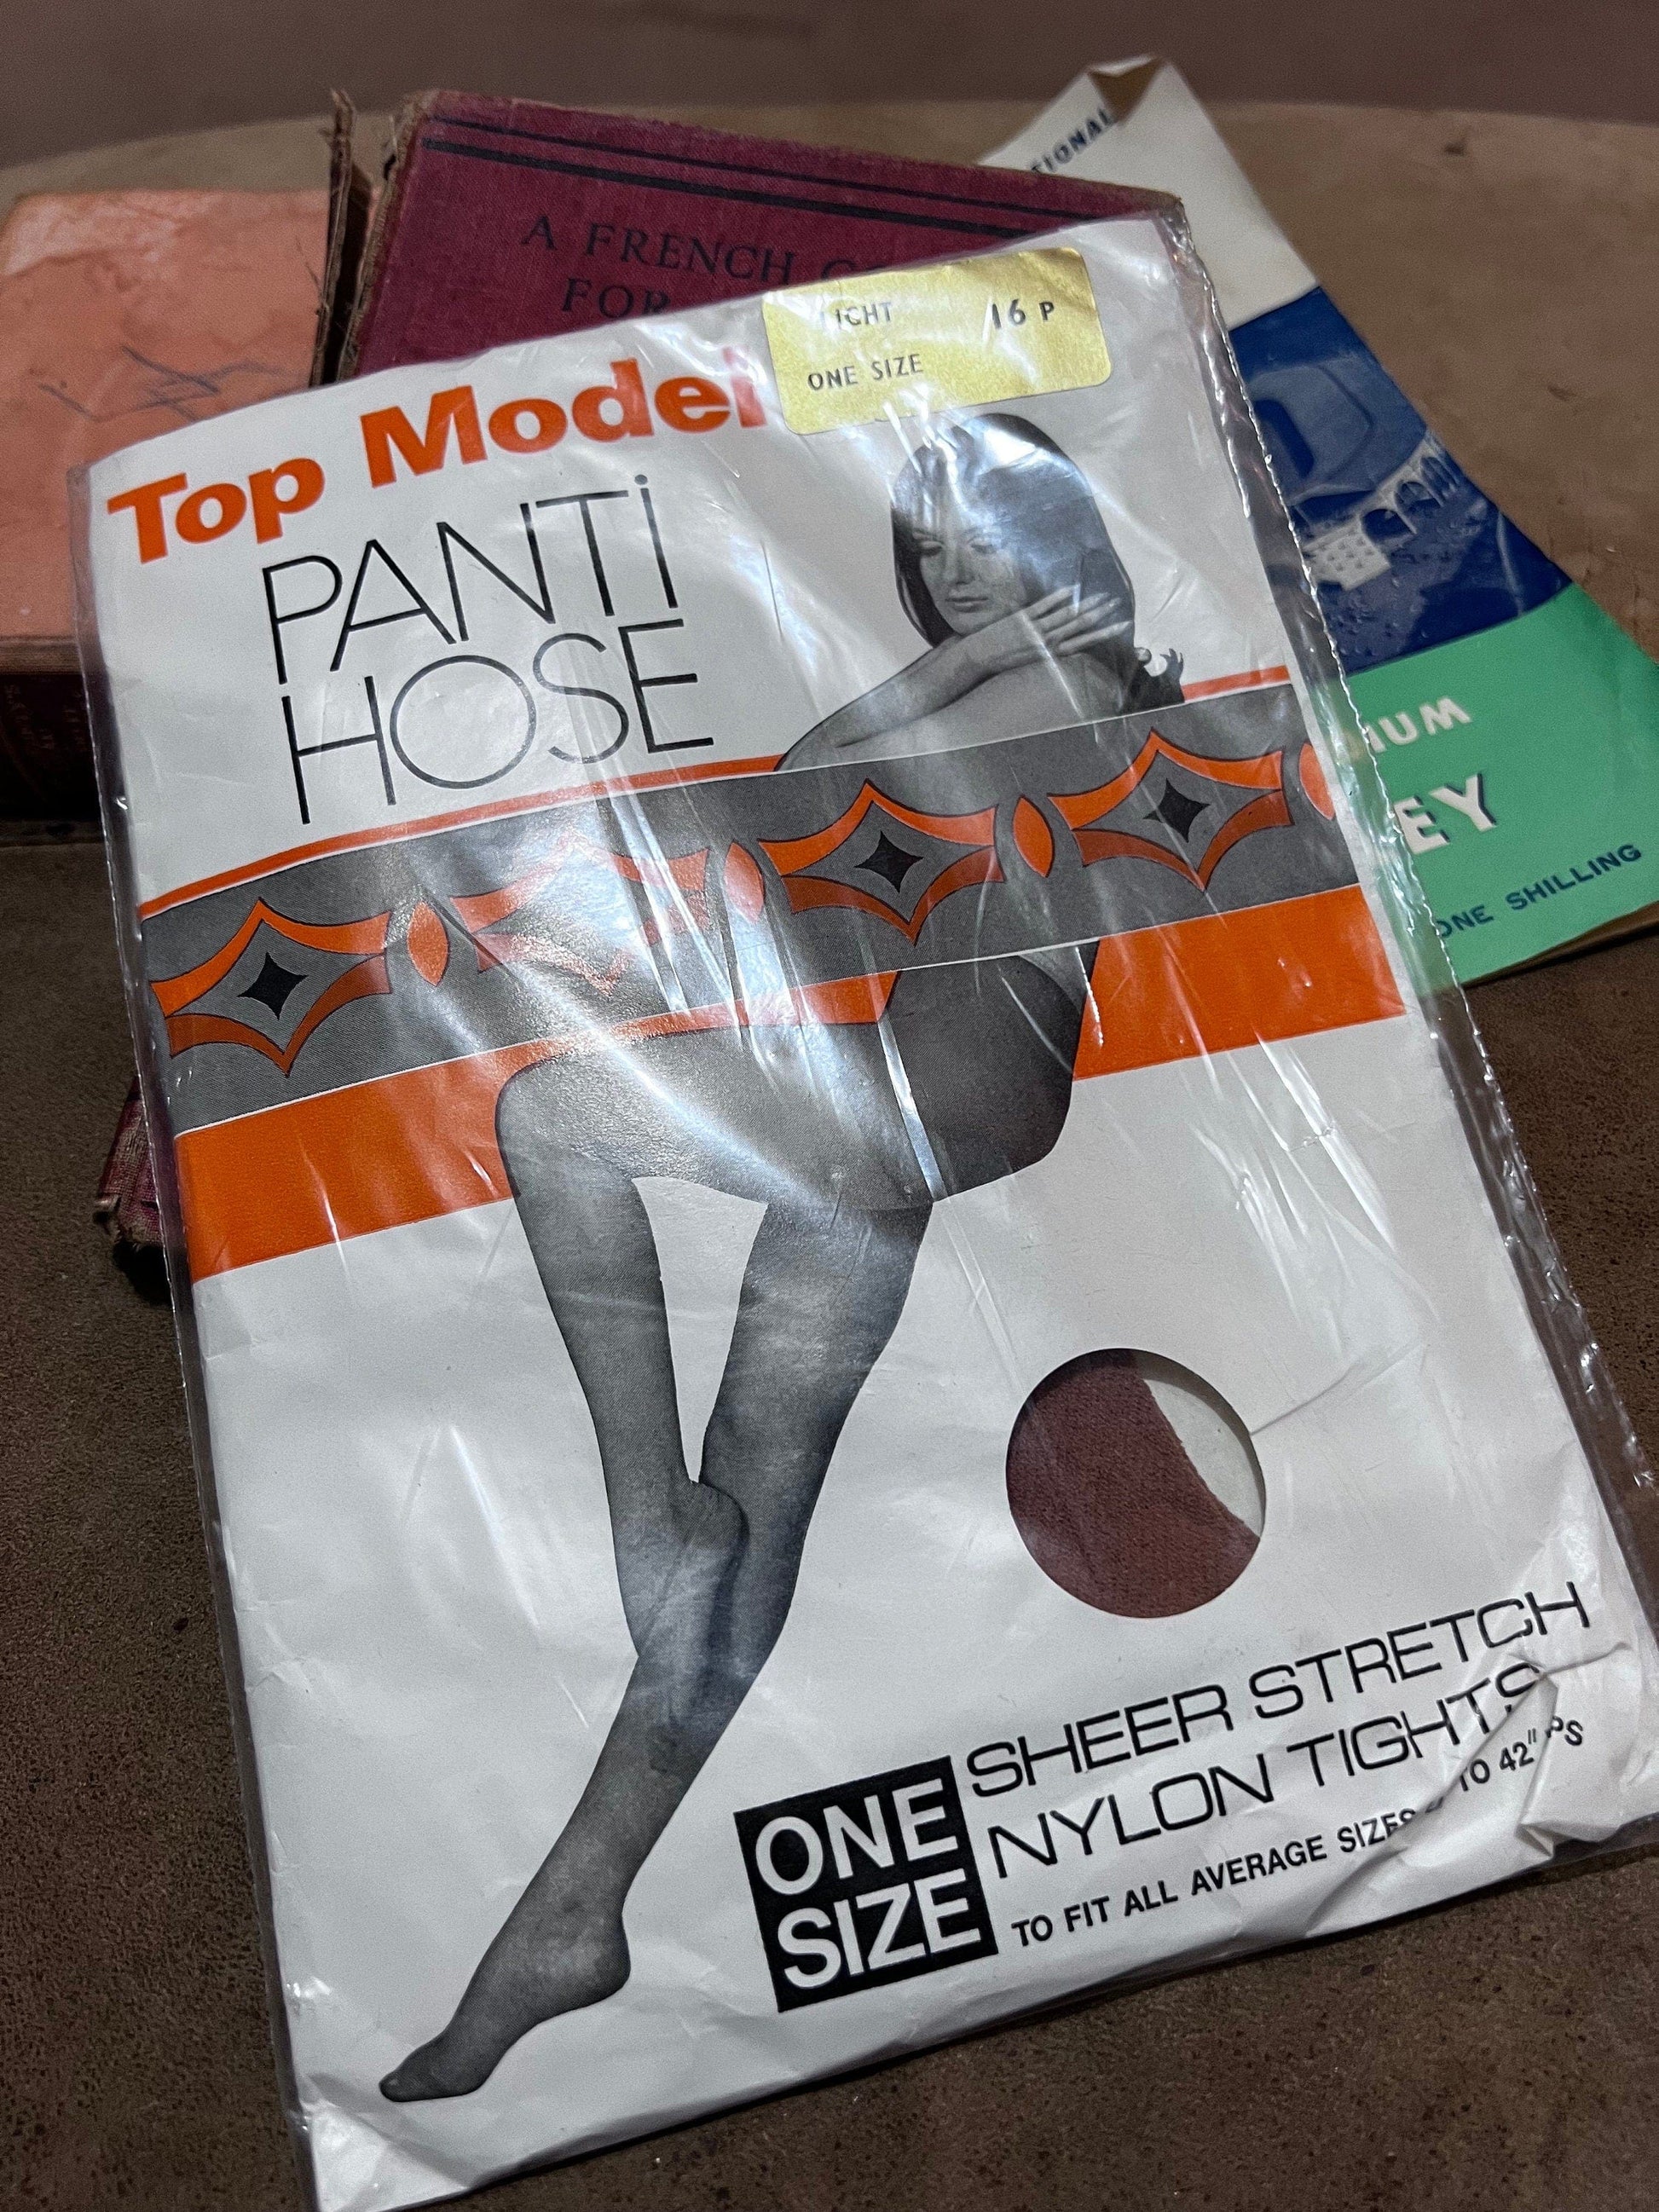 Vintage Womens light Tan Tights Deadstock Tights Brown Retro 60s 70s 1960s 1970s New in Packaging, vintage tights, vintage panty hose